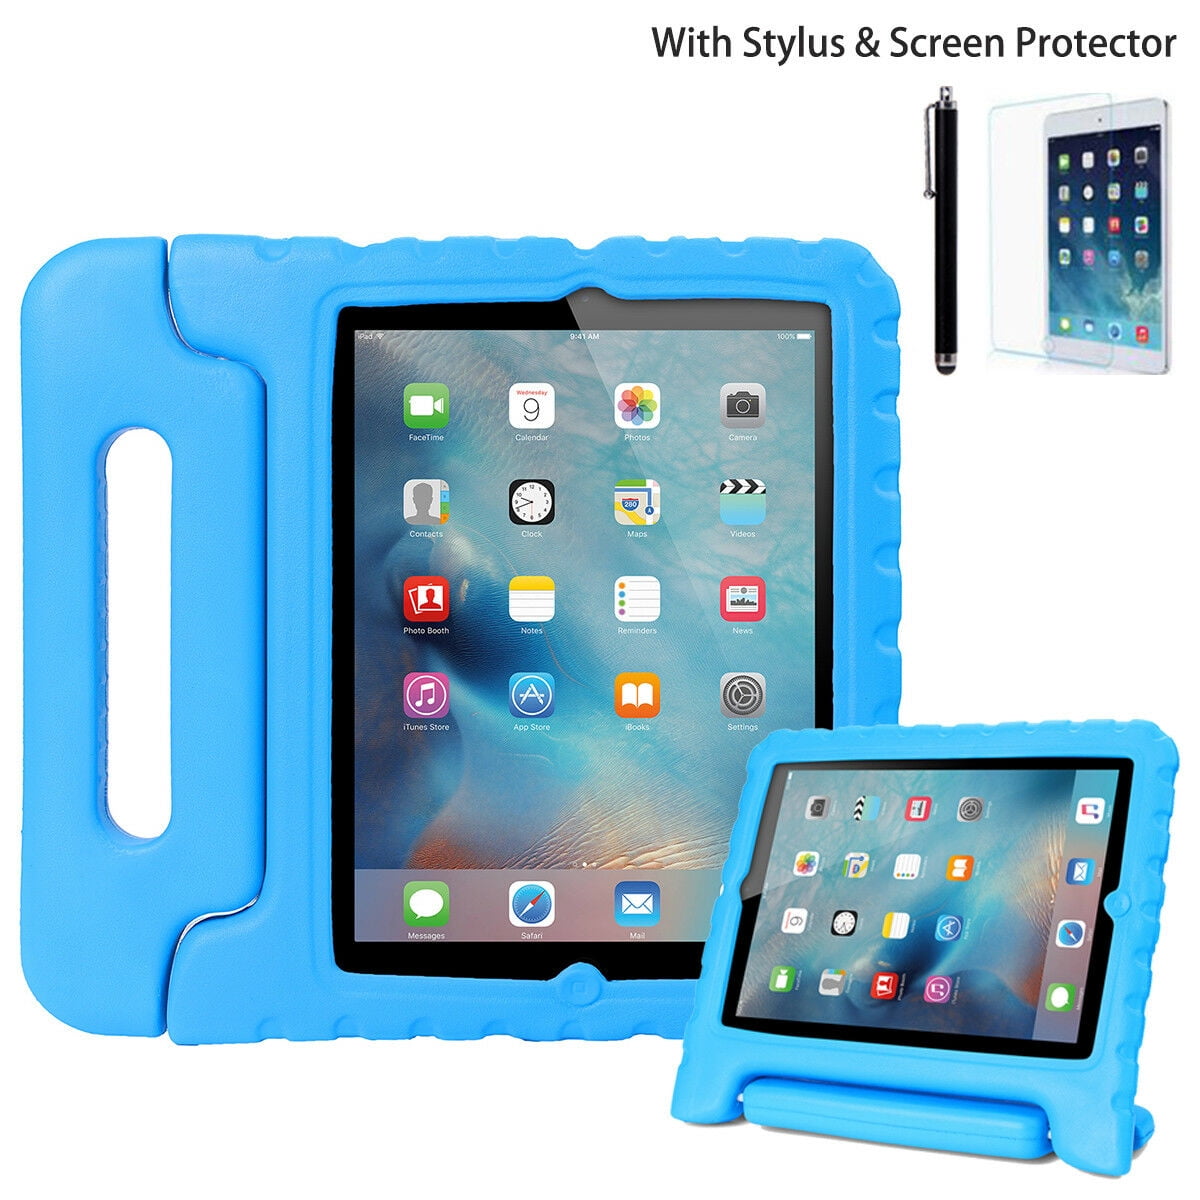 Hd Soft Film Protective accessories Cover For IPad 2/3/4/5/6 Pro 9.7 Protector 